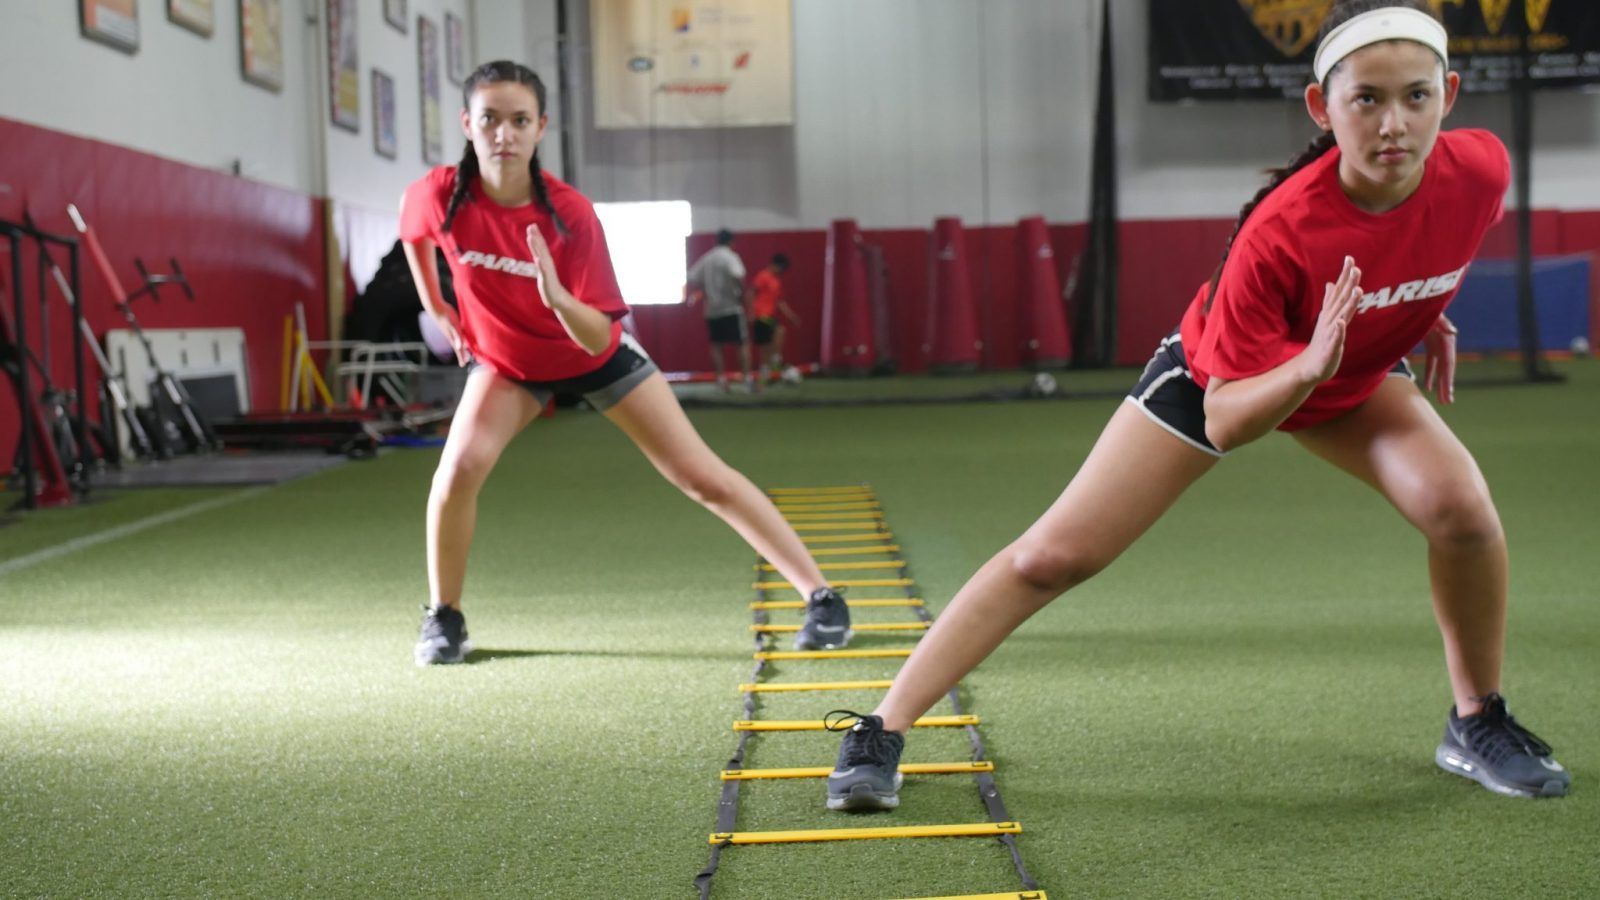 Sports performance training of two young female athletes on a grassy turf